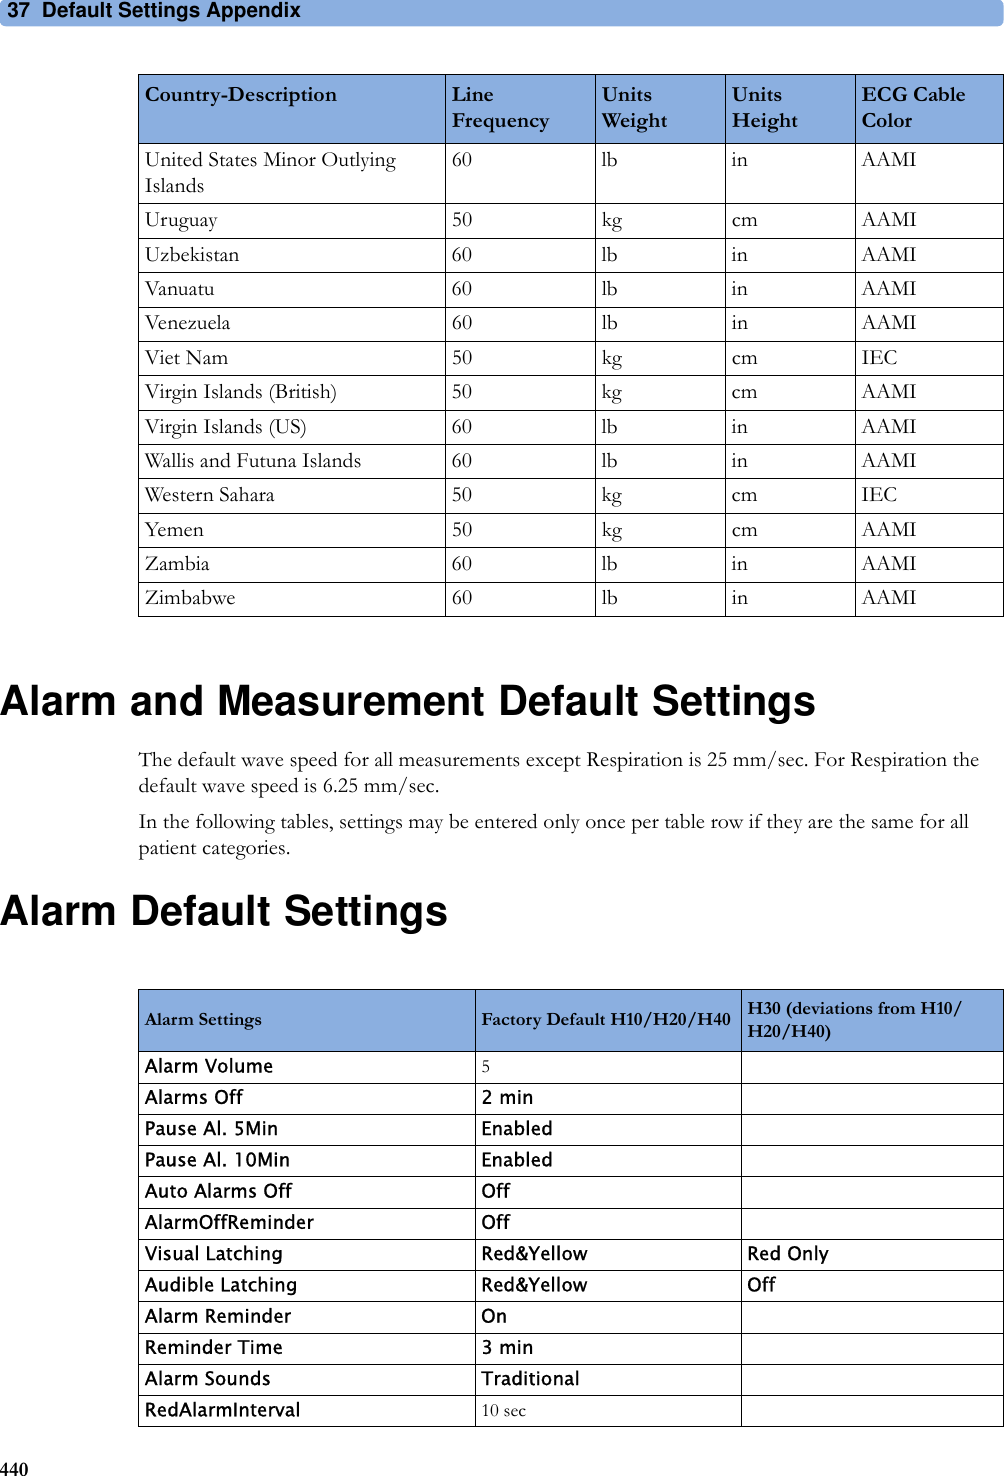 37 Default Settings Appendix440Alarm and Measurement Default SettingsThe default wave speed for all measurements except Respiration is 25 mm/sec. For Respiration the default wave speed is 6.25 mm/sec.In the following tables, settings may be entered only once per table row if they are the same for all patient categories.Alarm Default SettingsUnited States Minor Outlying Islands60 lb in AAMIUruguay 50 kg cm AAMIUzbekistan 60 lb in AAMIVanuatu 60 lb in AAMIVenezuela 60 lb in AAMIViet Nam 50 kg cm IECVirgin Islands (British) 50 kg cm AAMIVirgin Islands (US) 60 lb in AAMIWallis and Futuna Islands 60 lb in AAMIWestern Sahara 50 kg cm IECYemen 50 kg cm AAMIZambia 60 lb in AAMIZimbabwe 60 lb in AAMICountry-Description Line FrequencyUnitsWeightUnitsHeightECG Cable ColorAlarm Settings Factory Default H10/H20/H40 H30 (deviations from H10/H20/H40)Alarm Volume 5Alarms Off 2 minPause Al. 5Min EnabledPause Al. 10Min EnabledAuto Alarms Off OffAlarmOffReminder OffVisual Latching Red&amp;Yellow Red OnlyAudible Latching Red&amp;Yellow OffAlarm Reminder OnReminder Time 3 minAlarm Sounds TraditionalRedAlarmInterval 10 sec